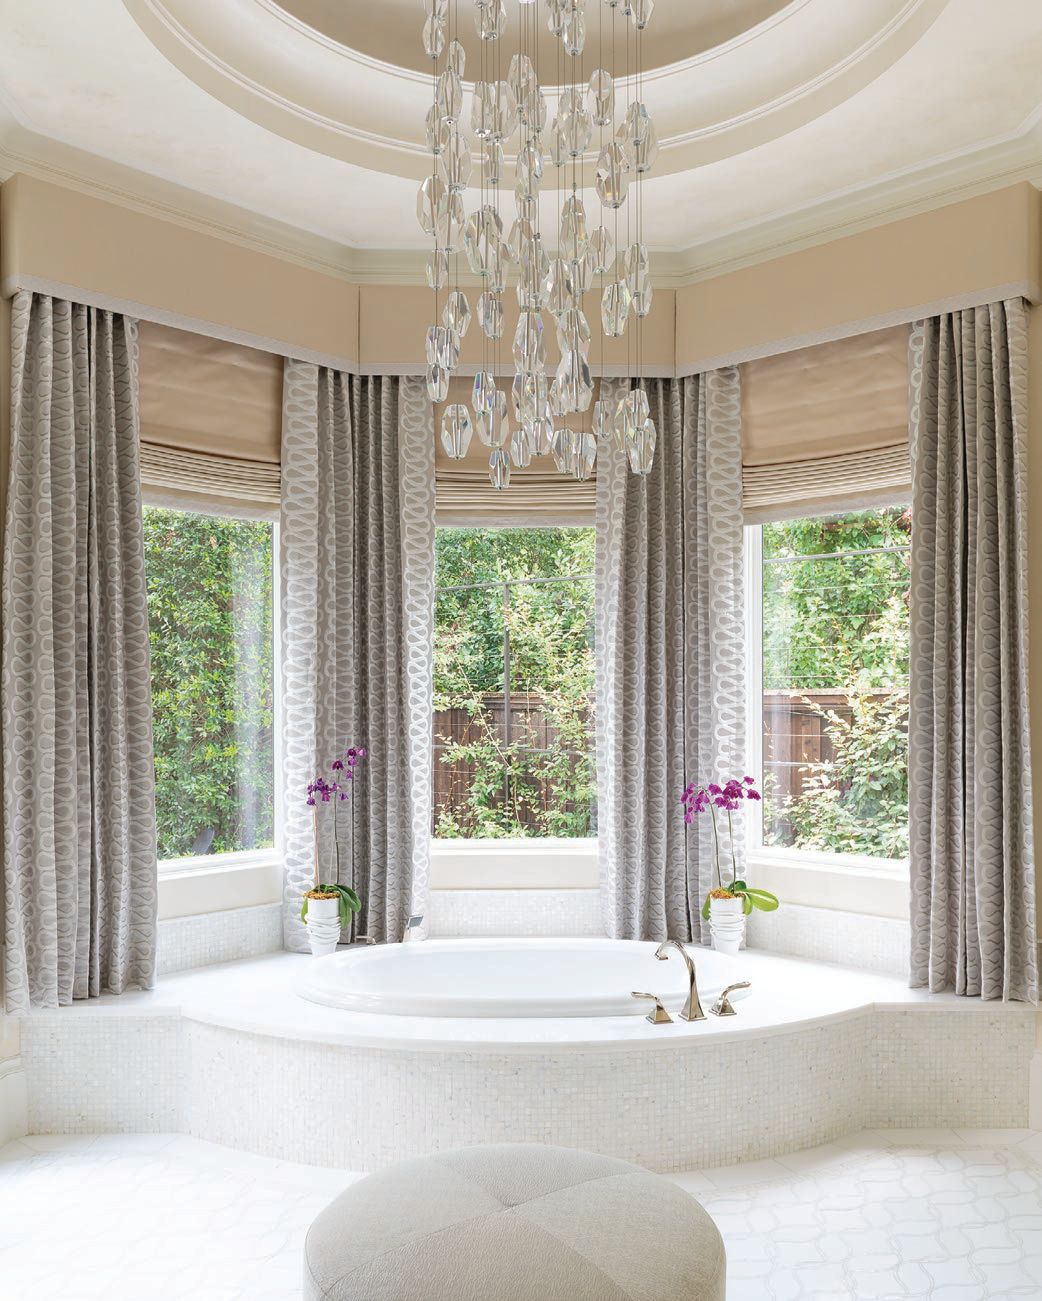 Her primary bath touts a stunning chandelier from Wired Custom Lighting. PHOTOGRAPHED BY DAN PIASSICK